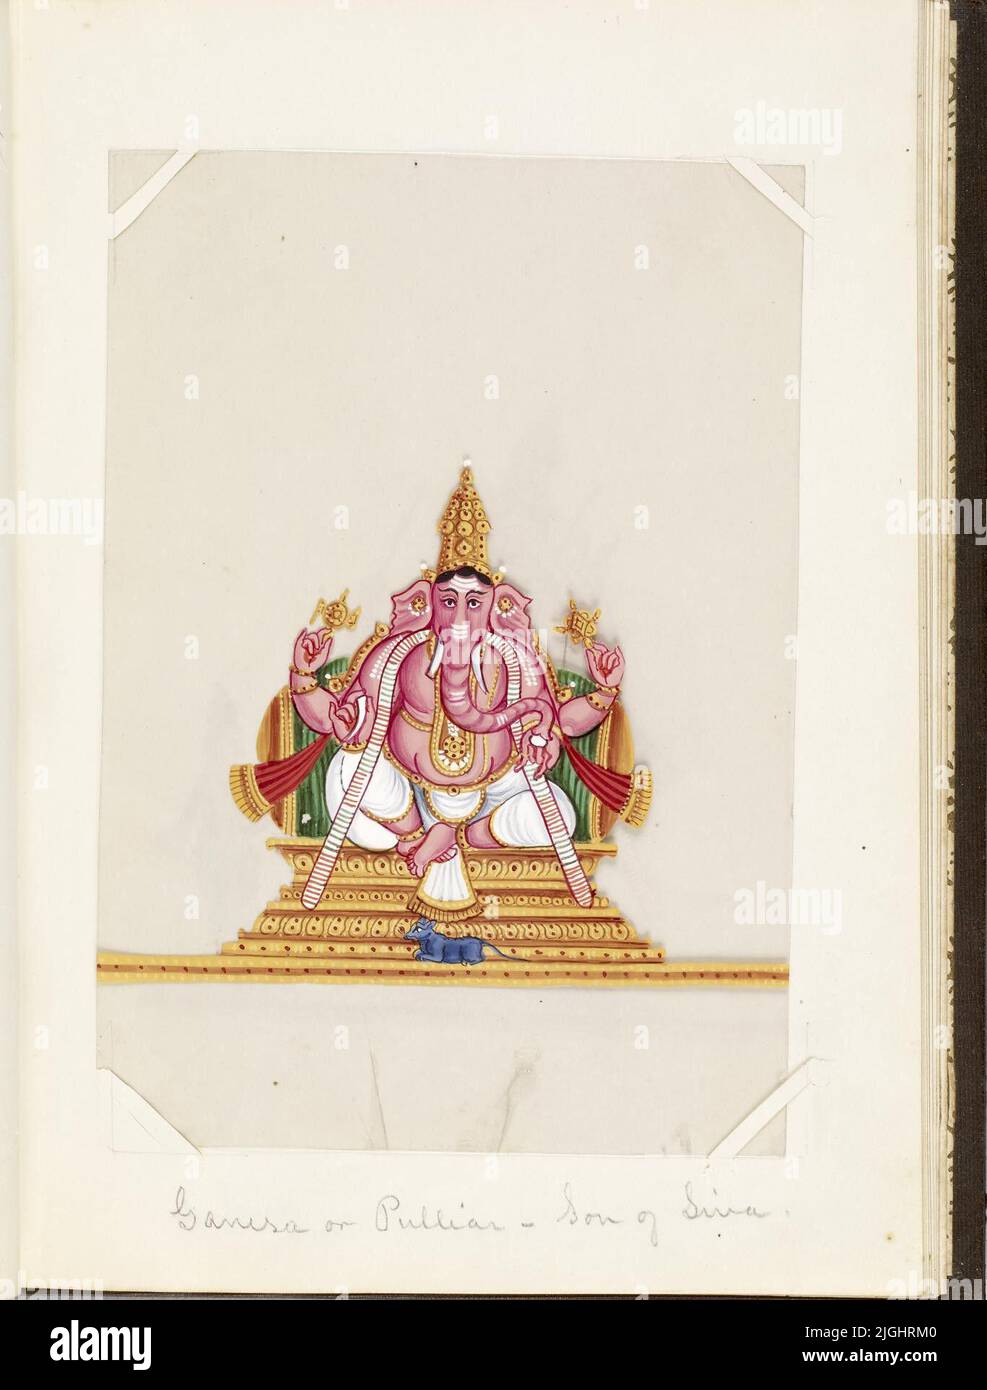 Ganesha India, Village life Indian, Leaf from Bound Collection of 20 Miniatures Depicting Village Life, 1870, paint on mica, H: 7 7/8 x W: 6 5/16 in. (20 x 16 cm), Stock Photo